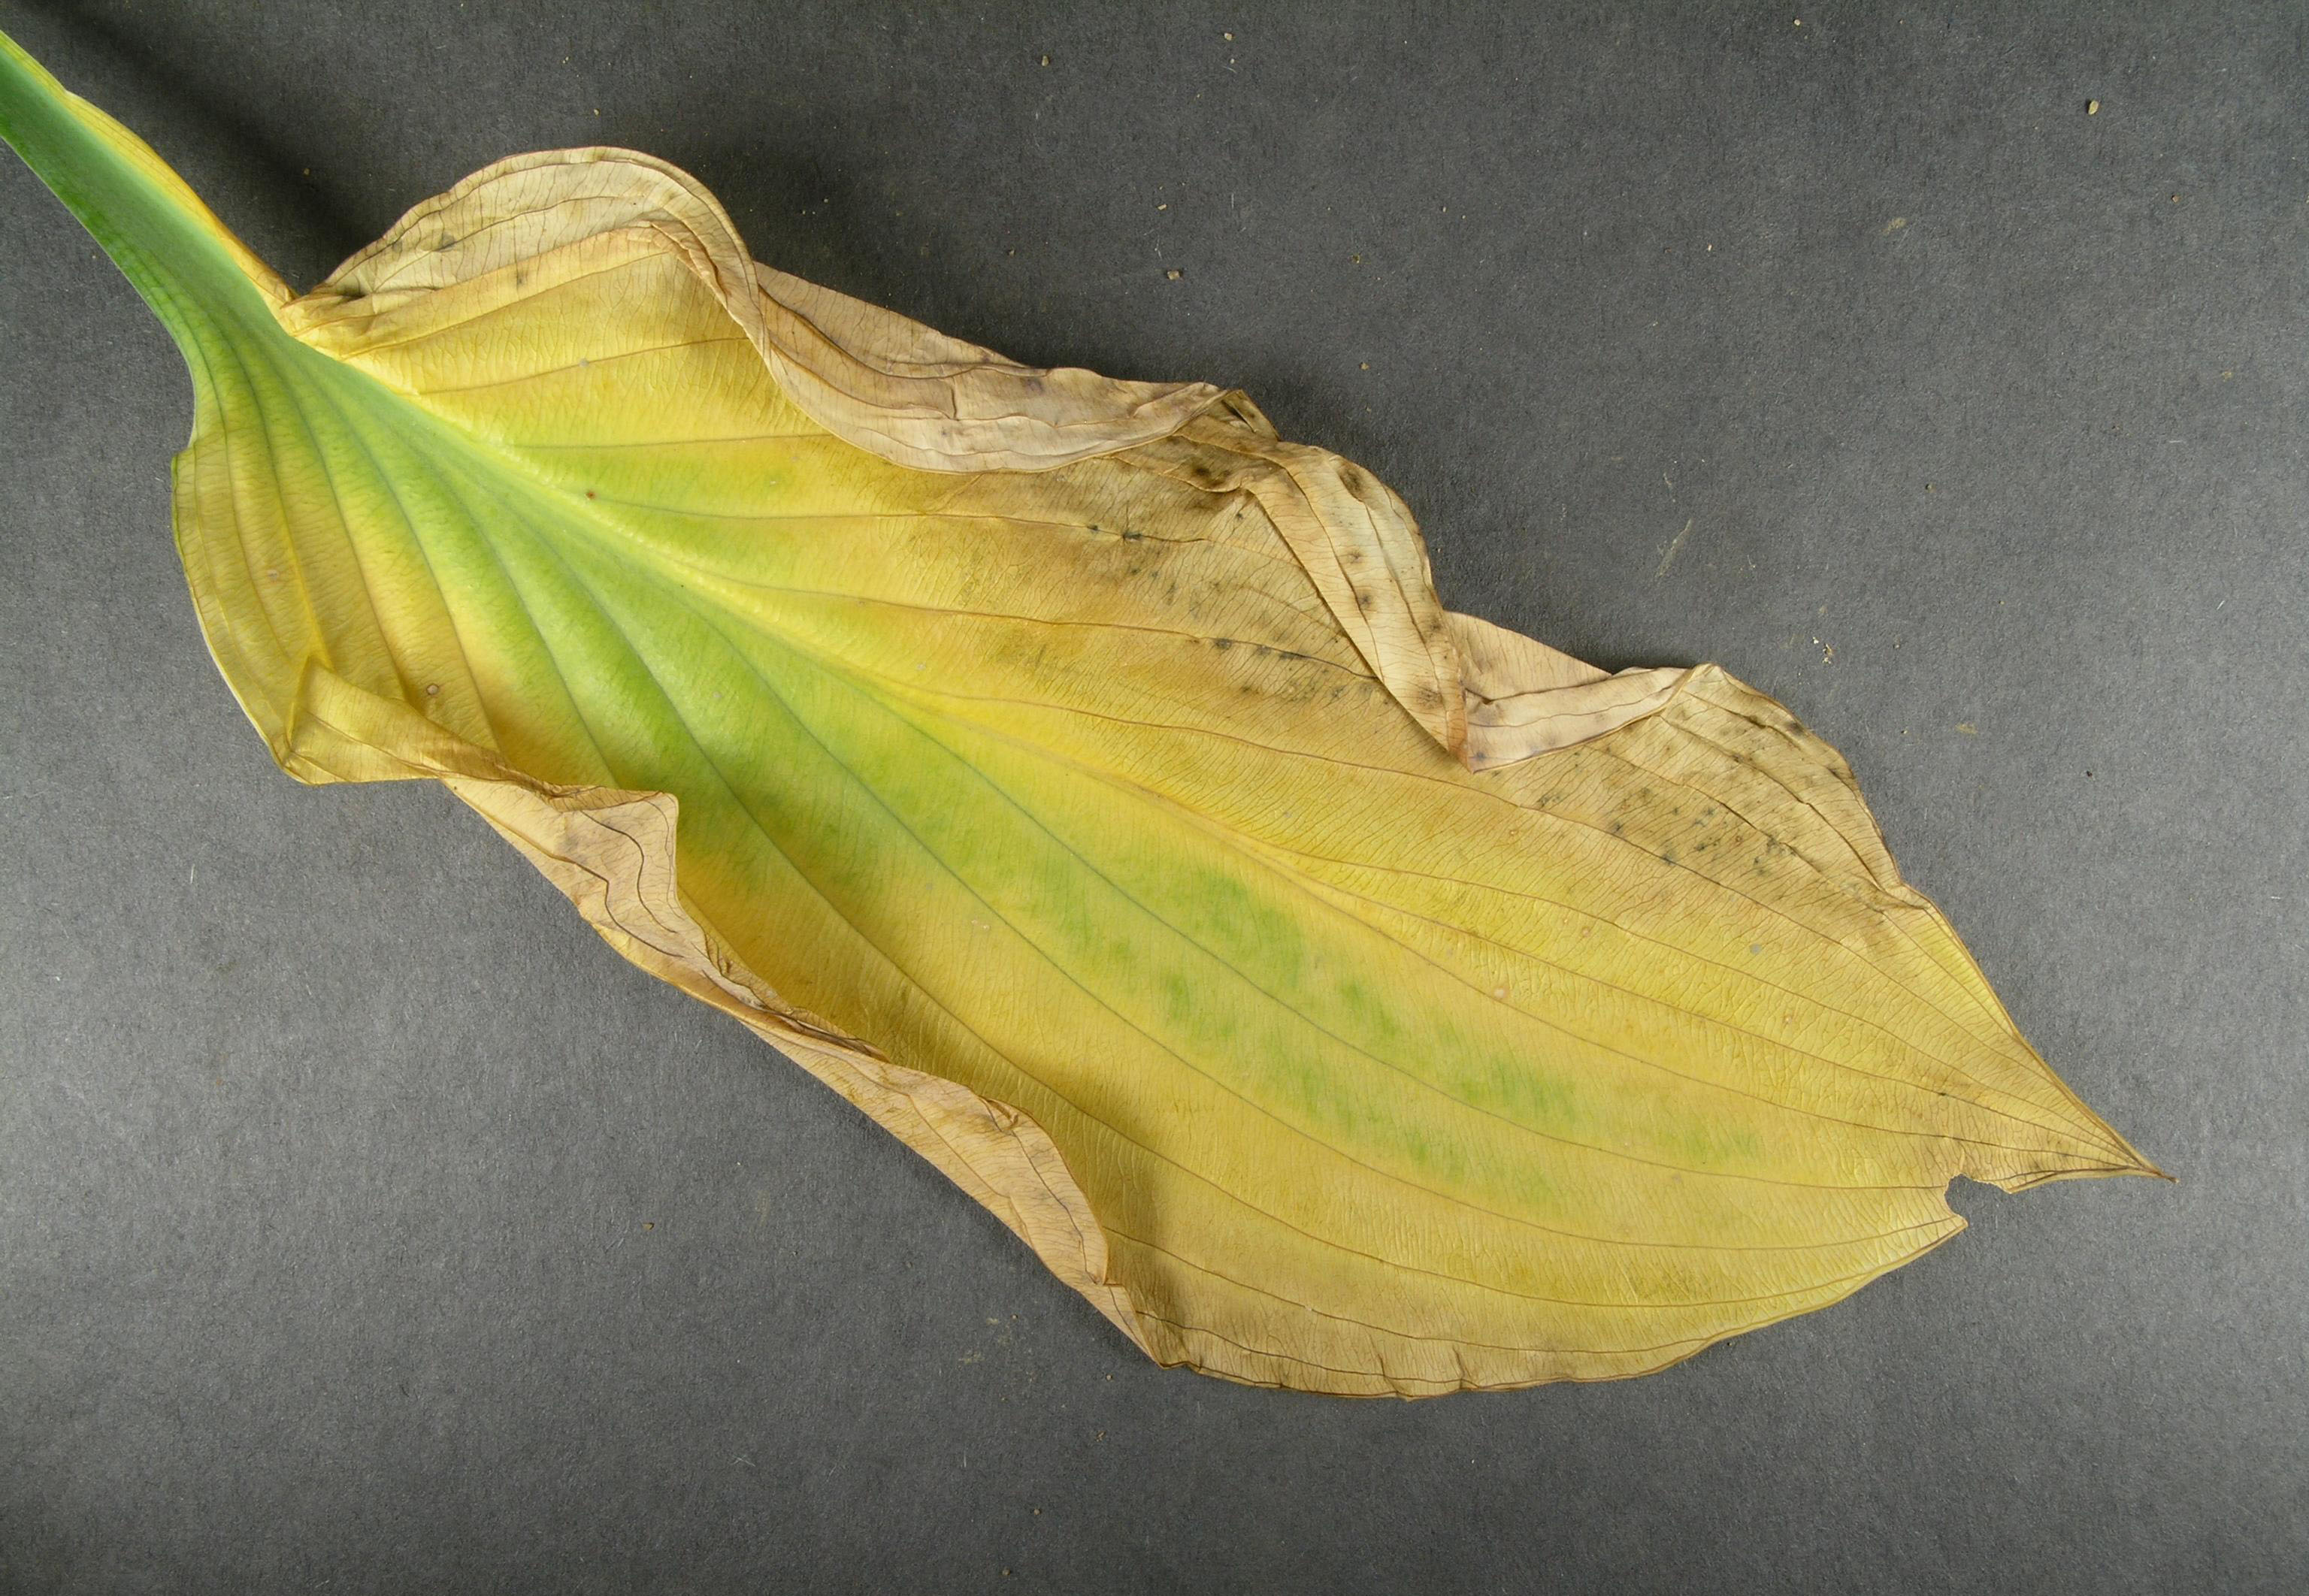 A yellowed, abnormally curled hosta leaf that is infected with southern blight.